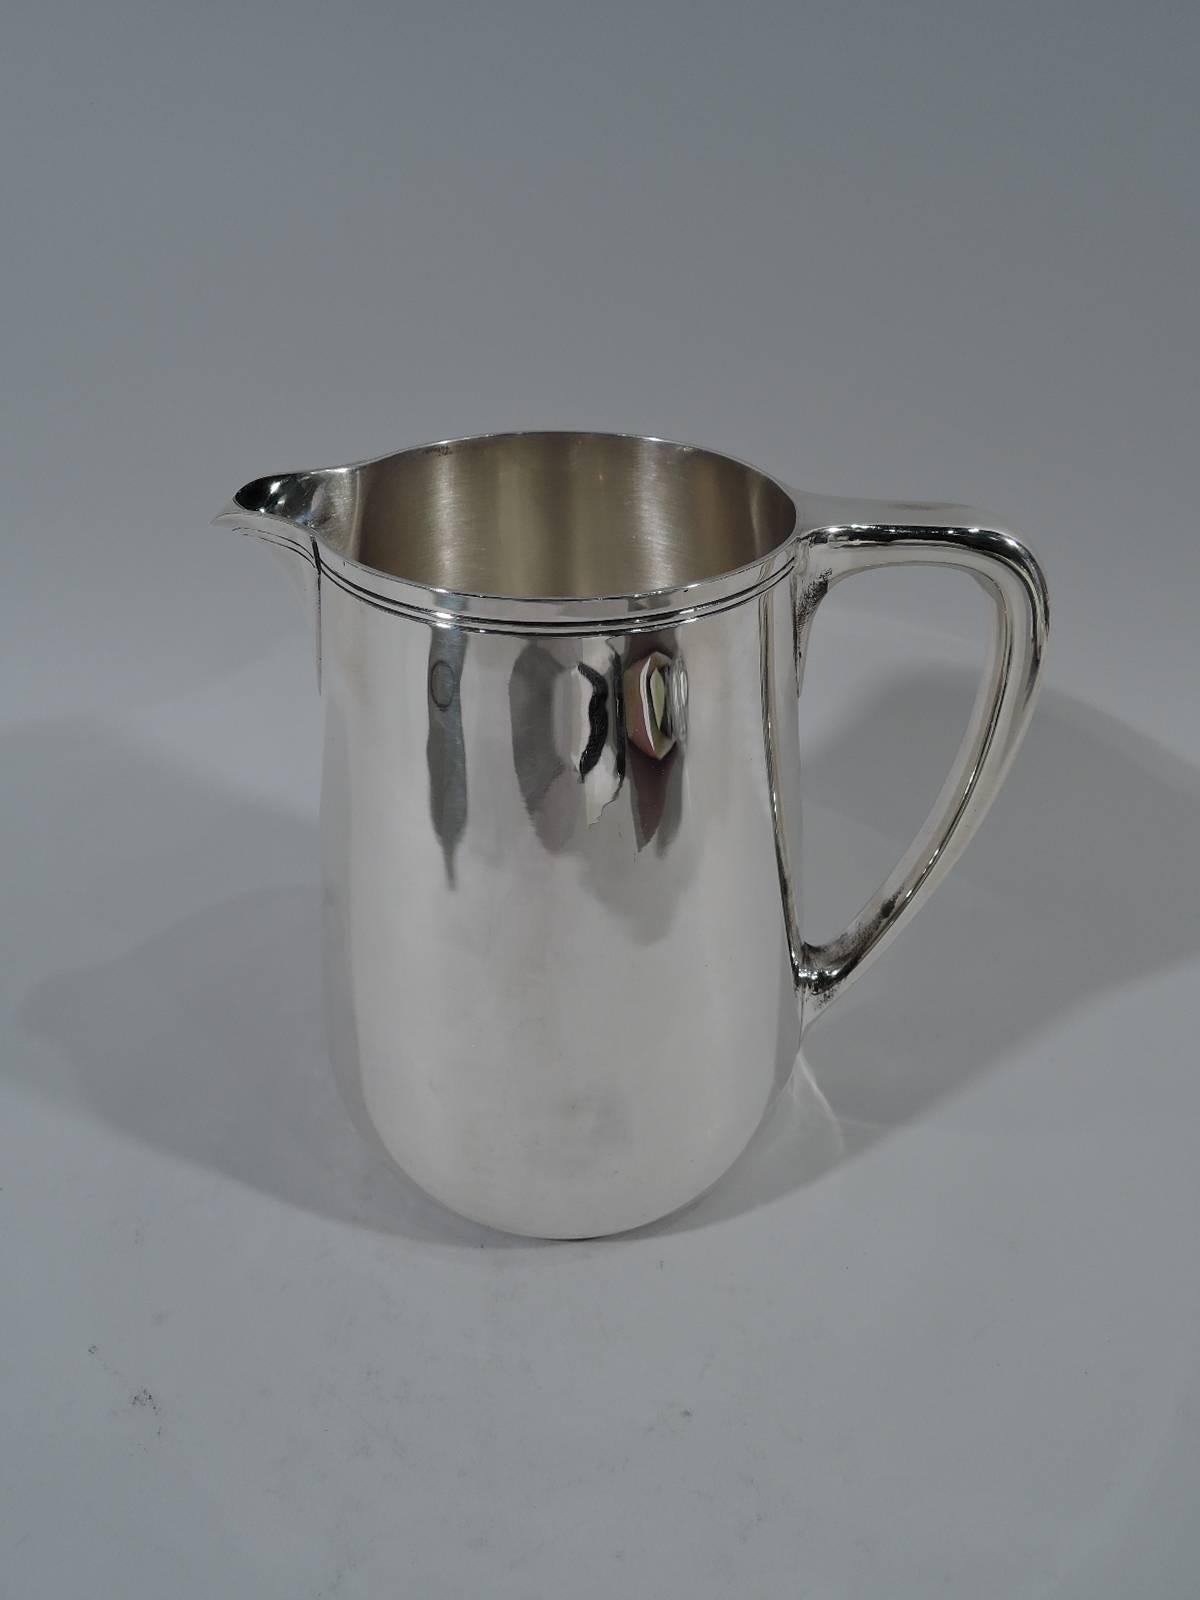 Sterling silver water pitcher. Made by Tiffany & Co. in New York. Upward tapering sides, scrolled bracket handle, and v-spout. Softened Modernism with spare incised banding wrapping around rim and spout. Hallmark includes pattern no. 22343 and